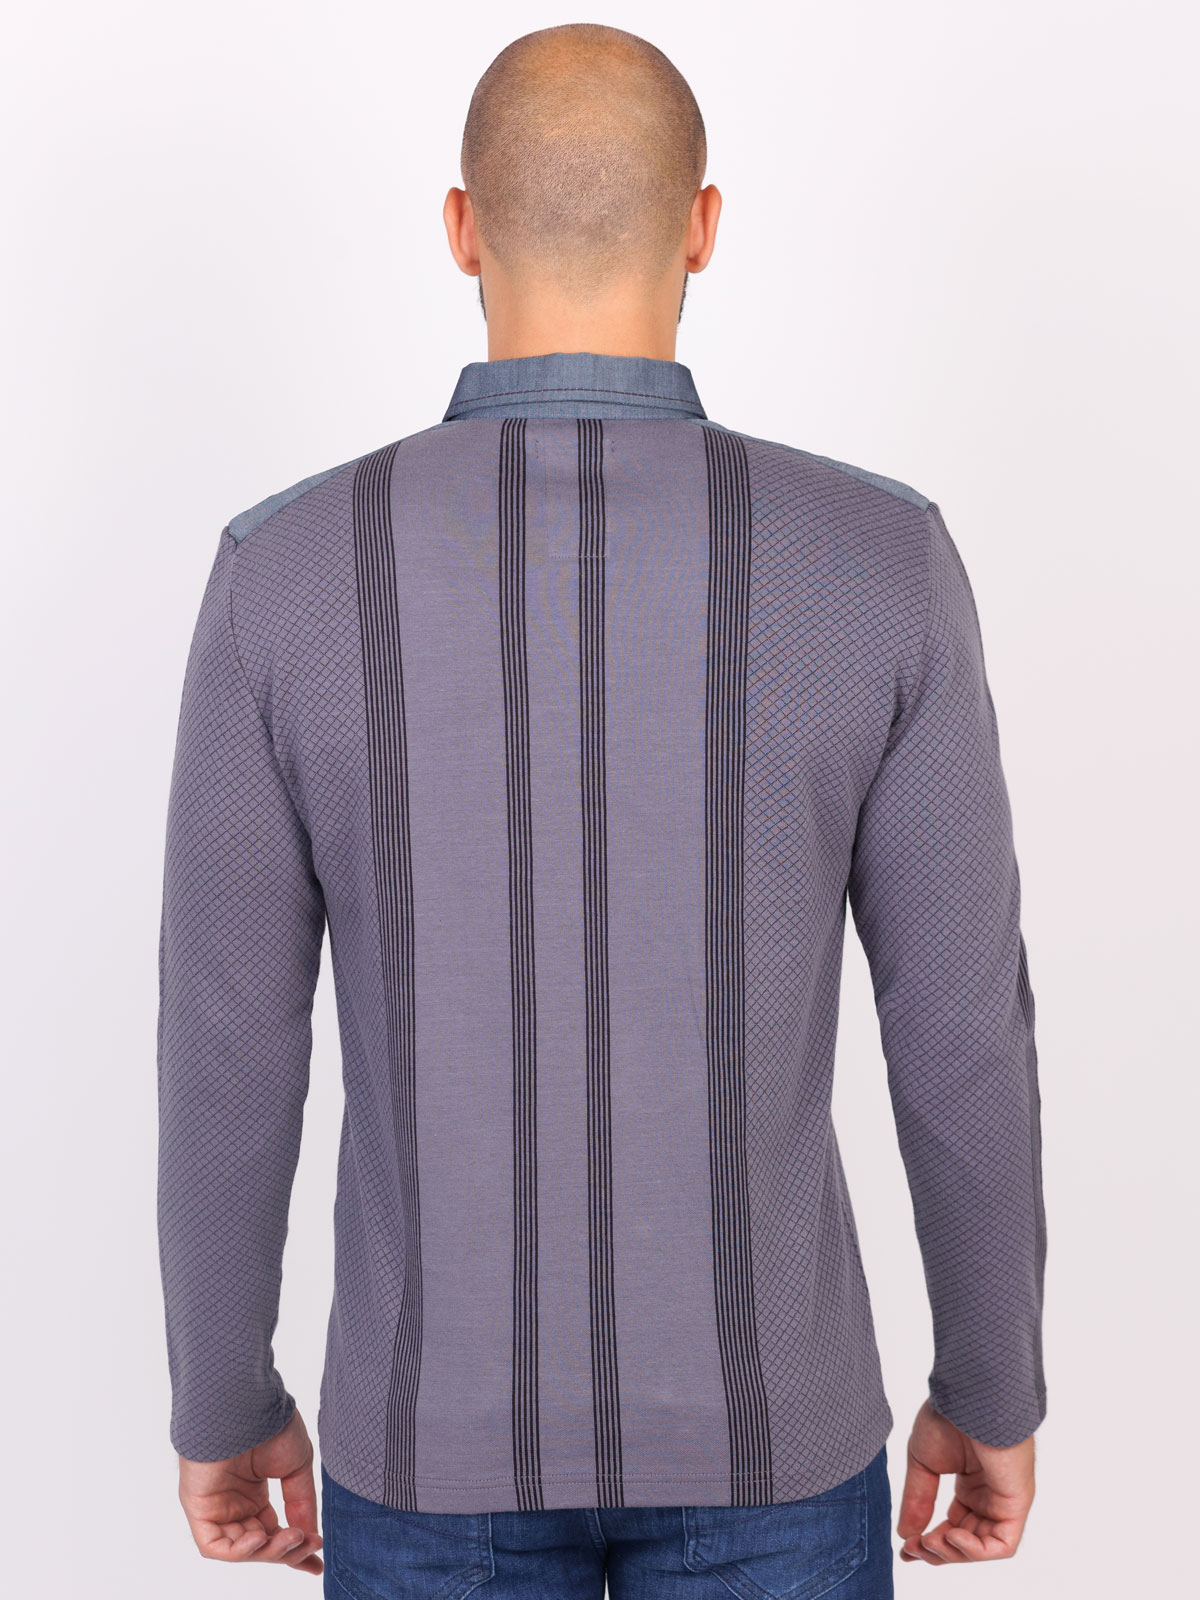 Mens blouse with hidden pocket - 18261 € 27.56 img2